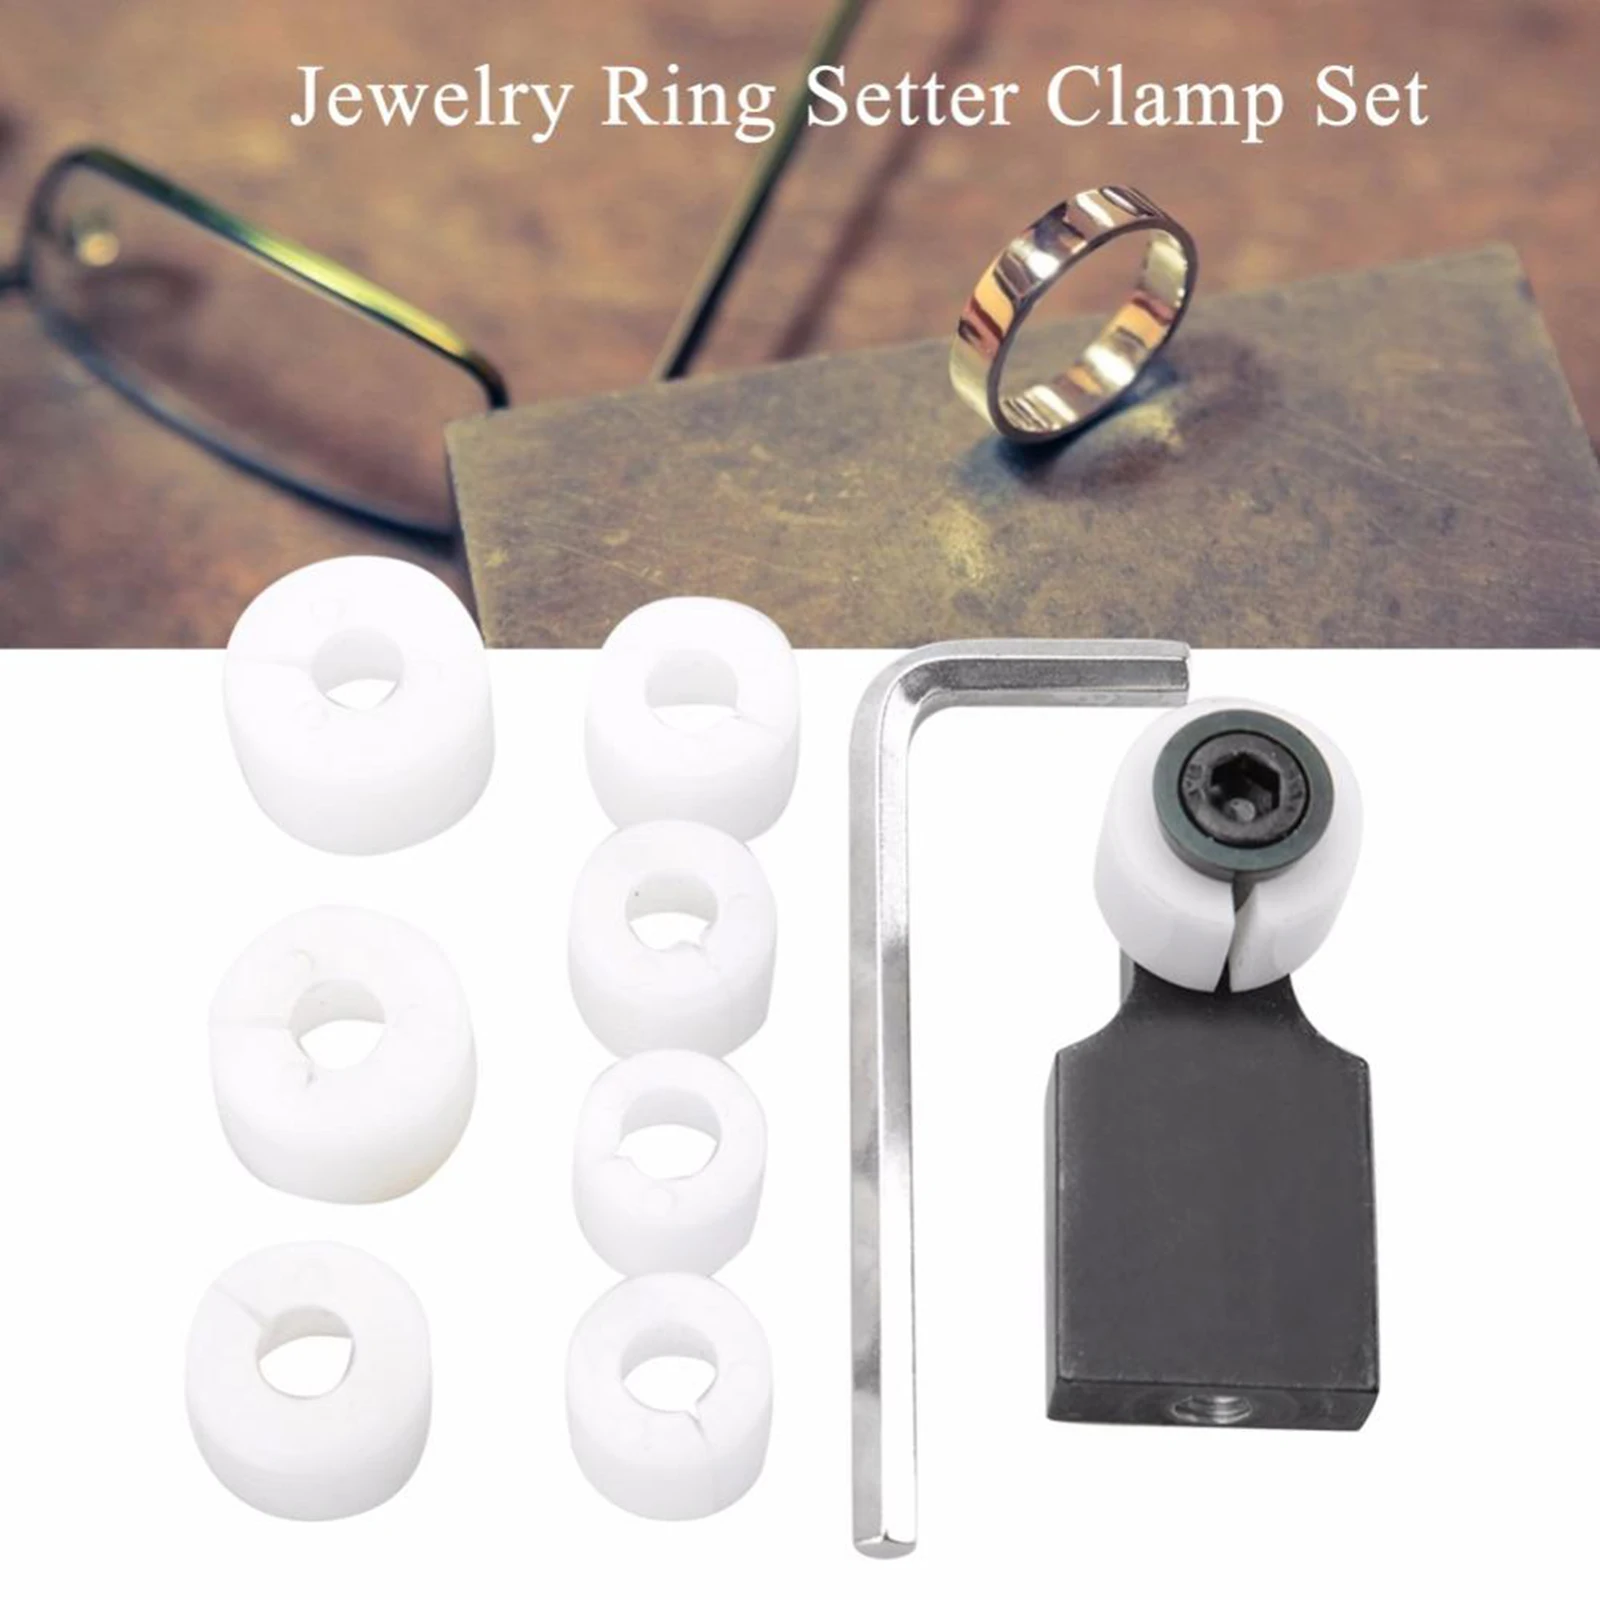 Ring Setting Jewelry Ring Processing Setter Clamp Channel Setting Tool Kit for Ring Setting Expanding